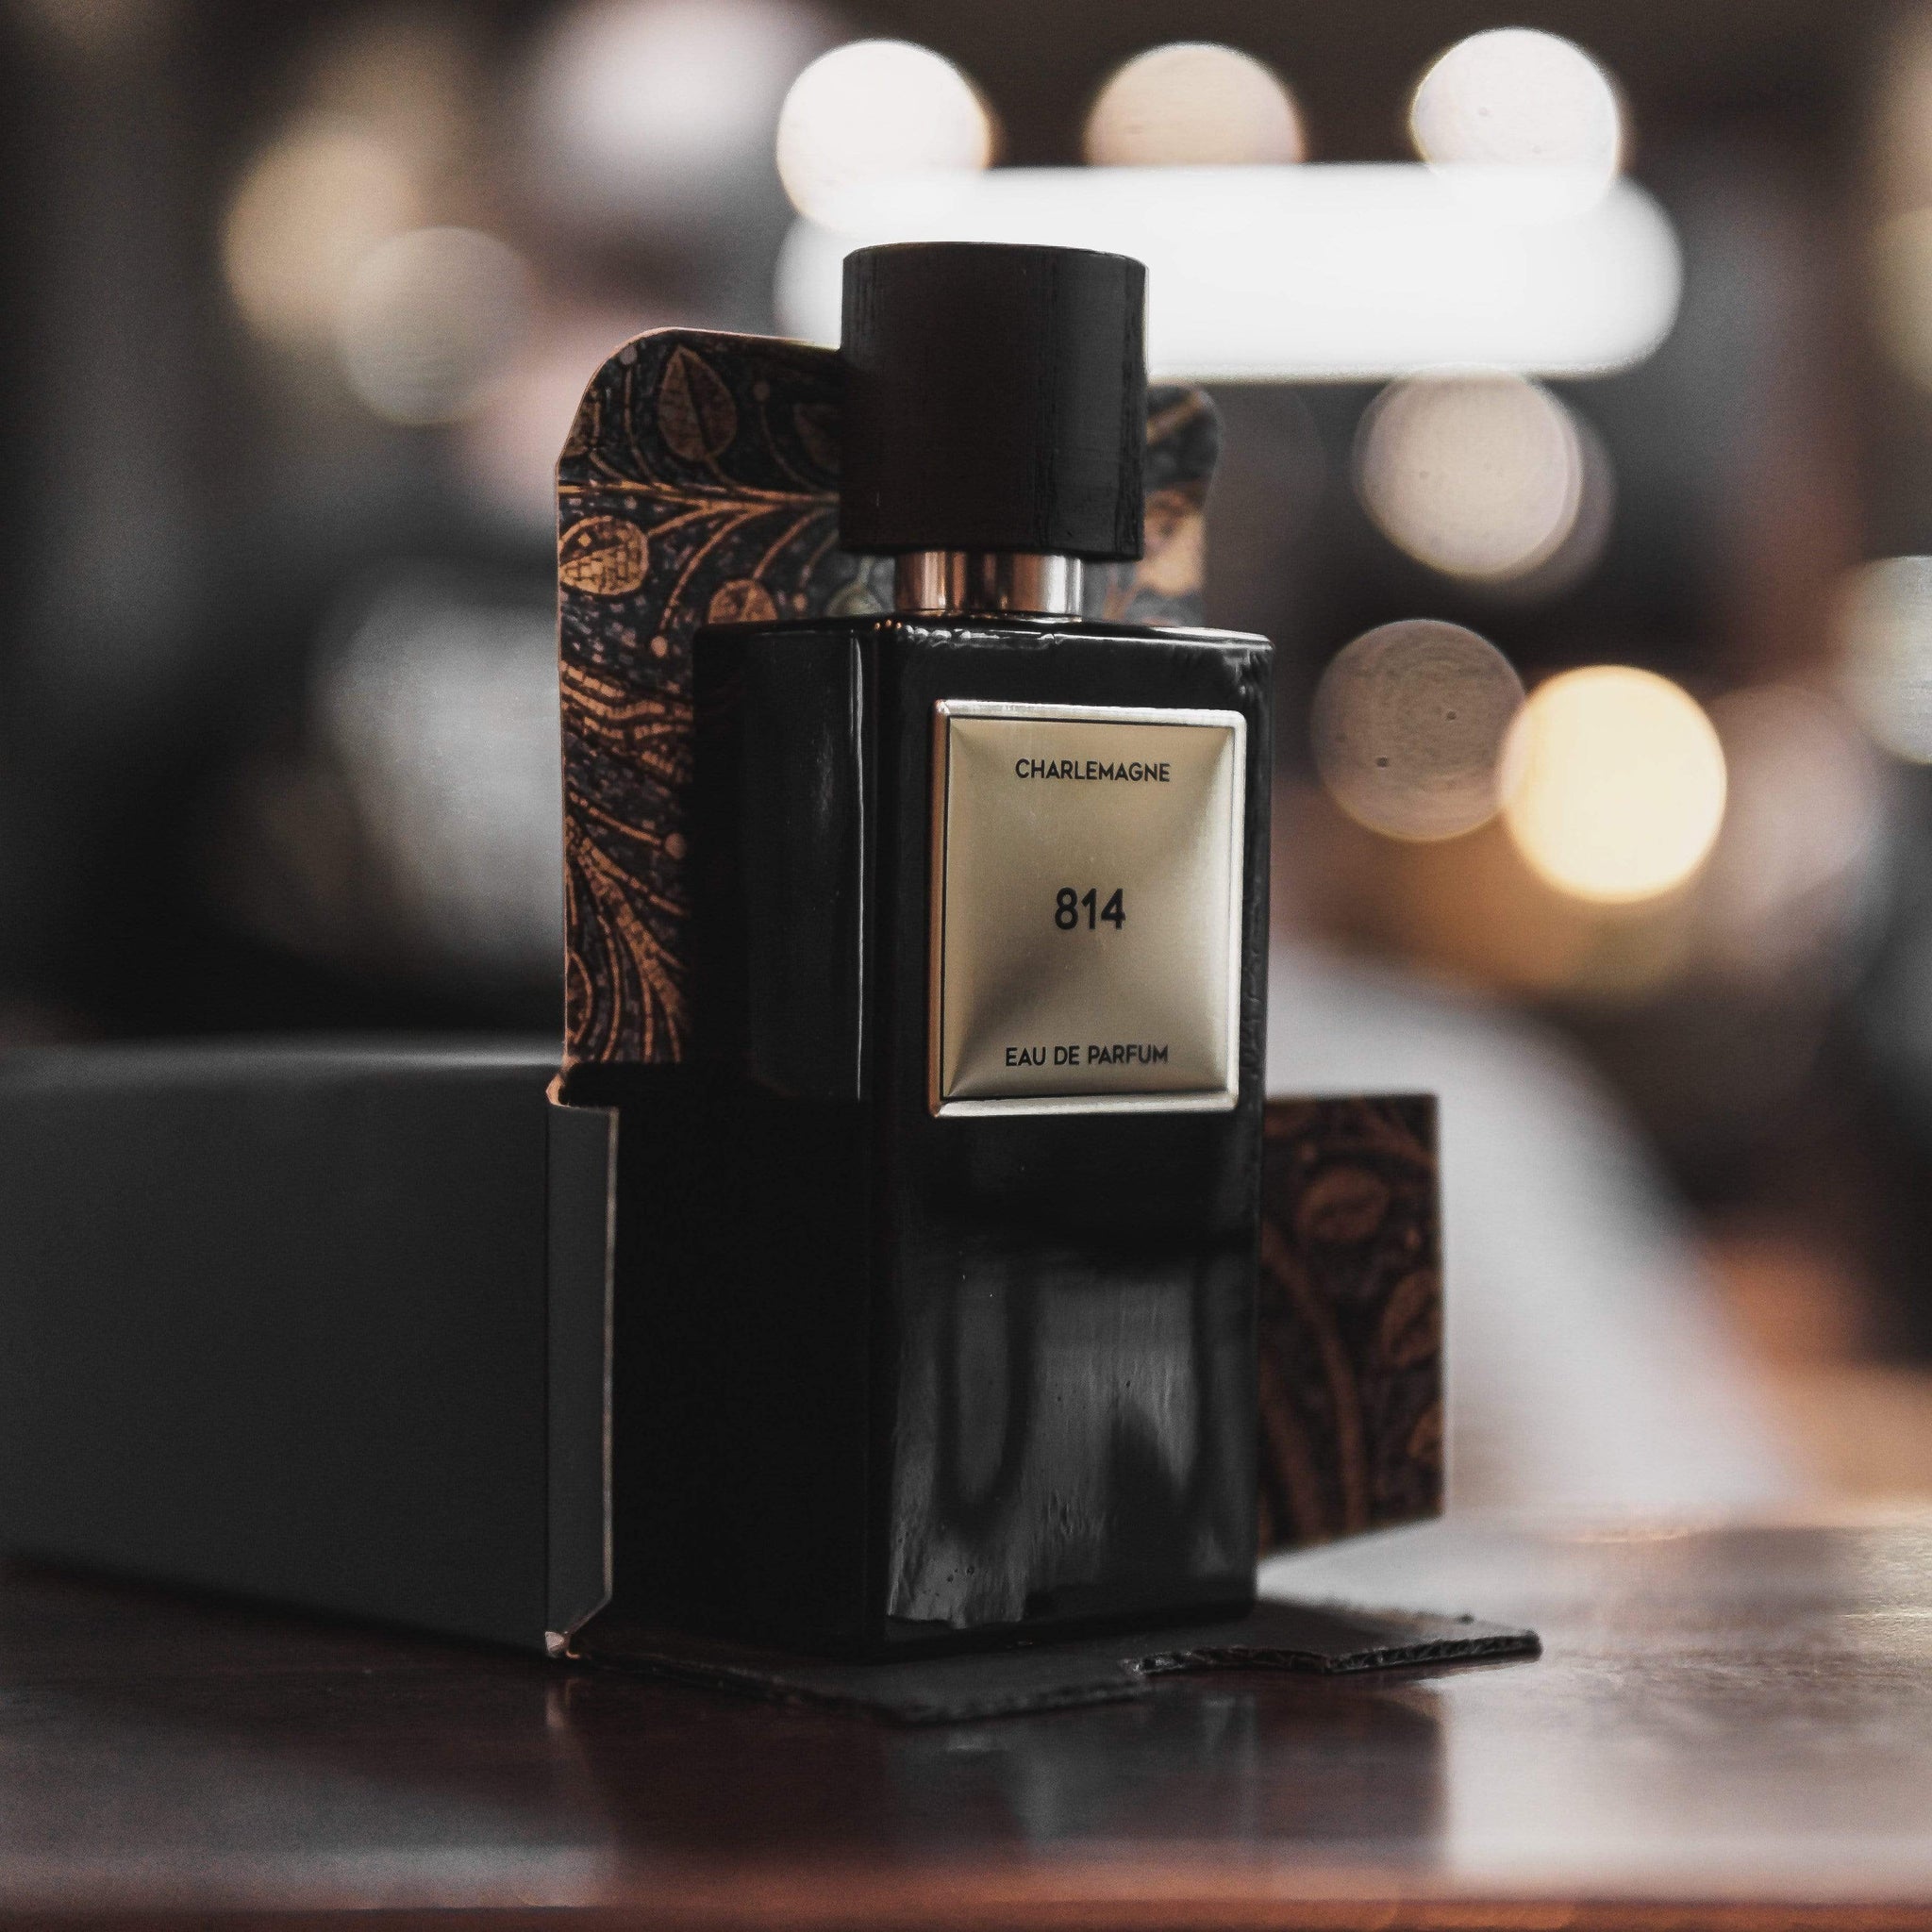 By - Barbers Charlemagne Parfum 814 Created Charlemagne Premium • • Eau de